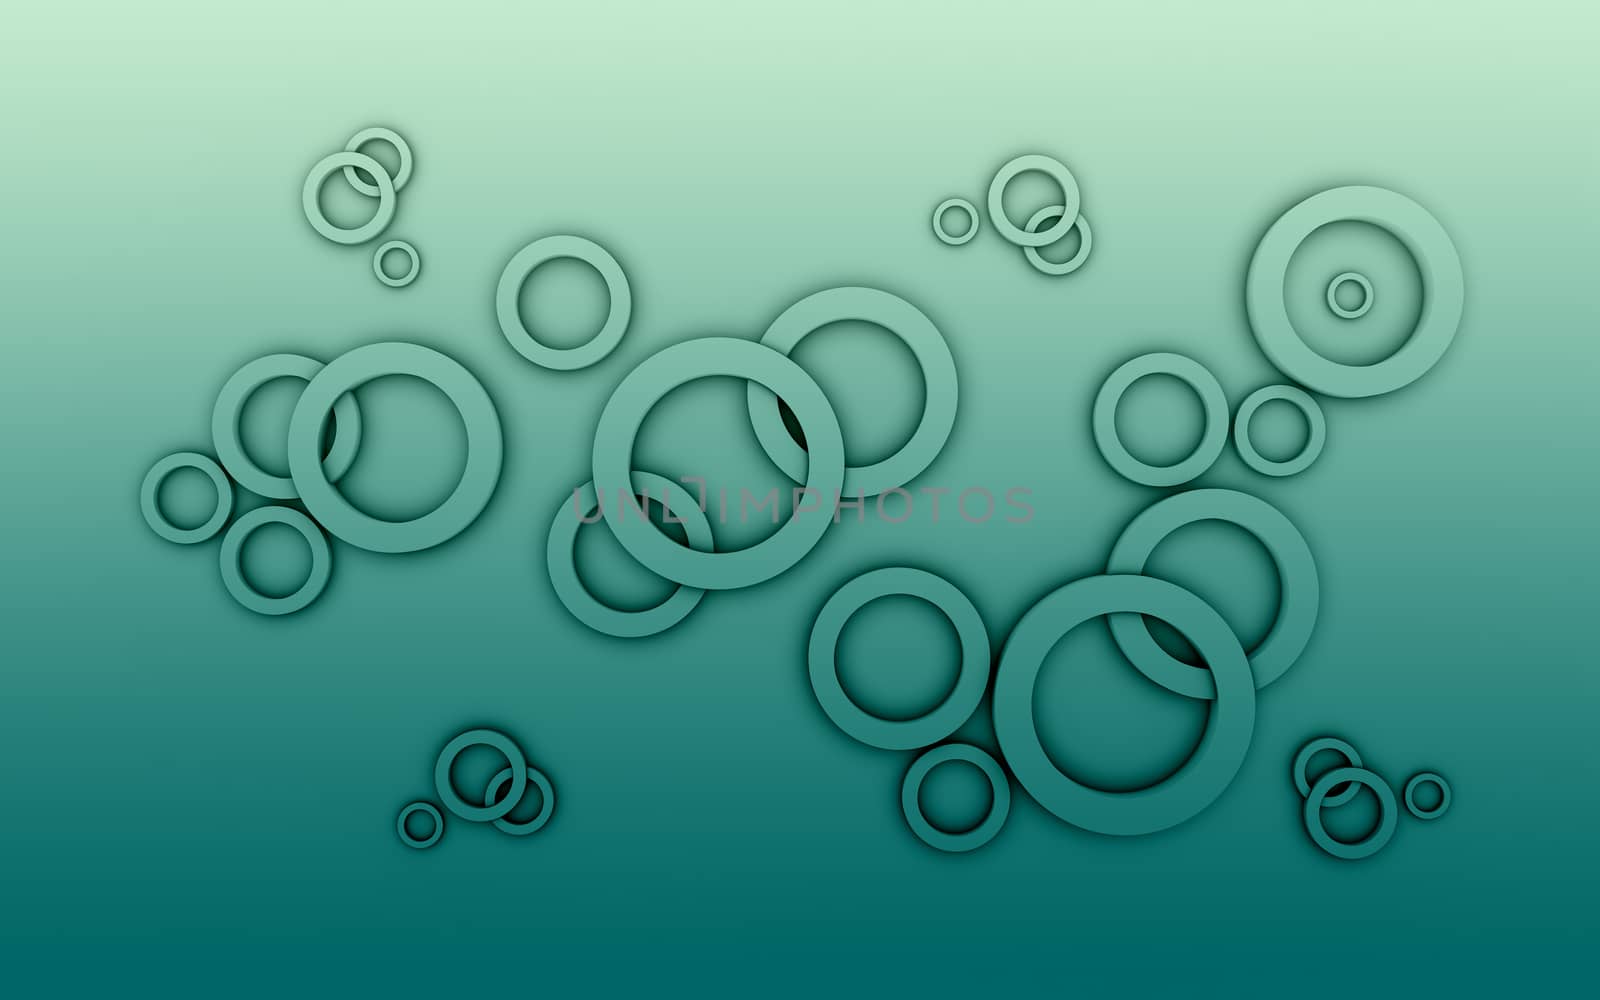 Abstract Background Overlapping circles concept